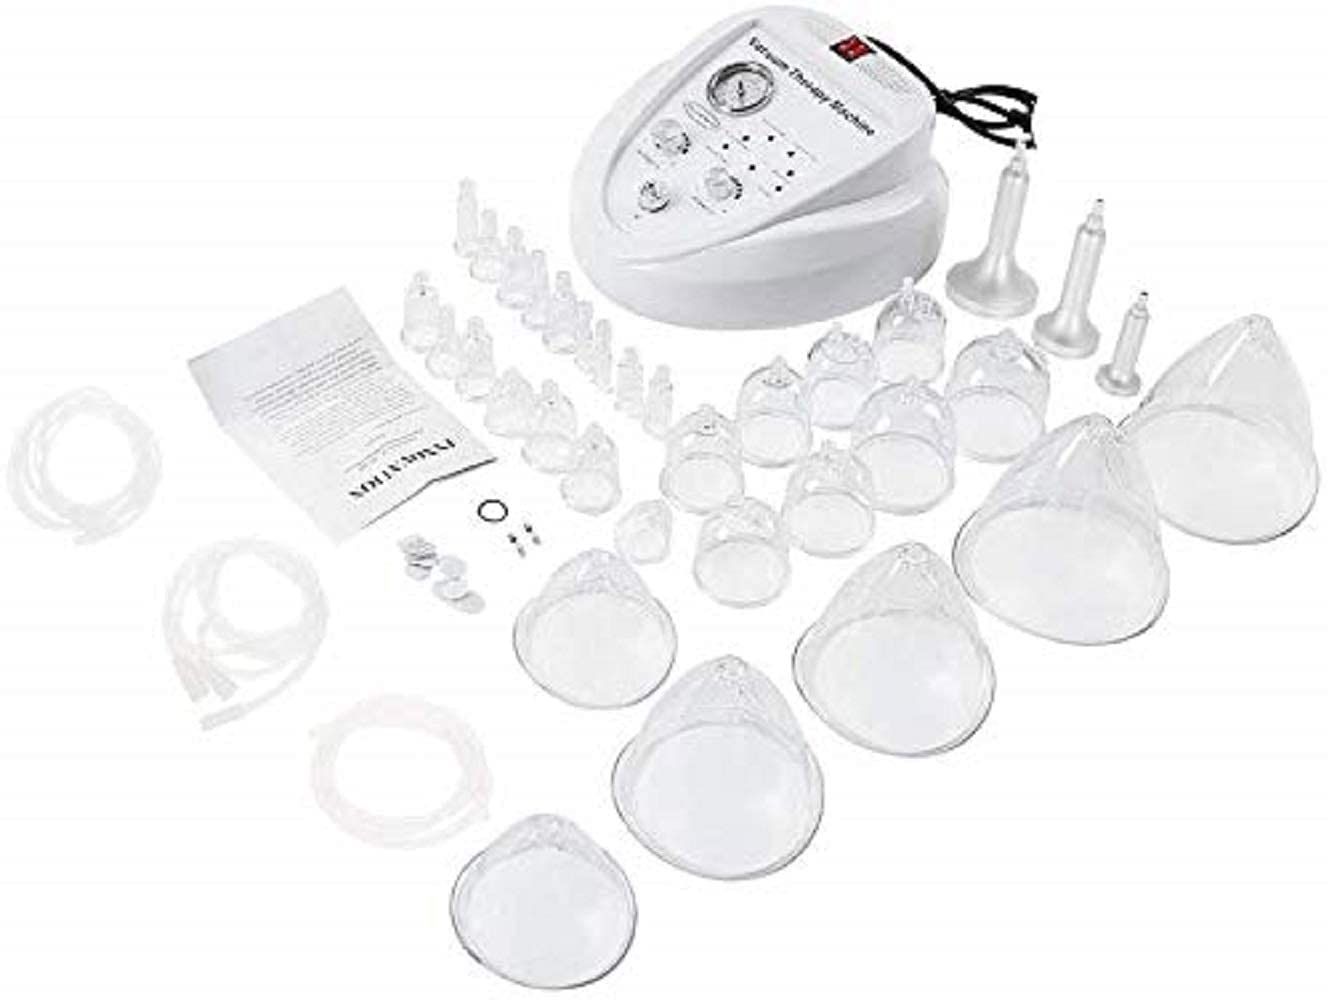 Brand New Vacuum Therapy Machine, Unsvorns BBL Vacuum Cupping Massager with 24 Vacuum Cups